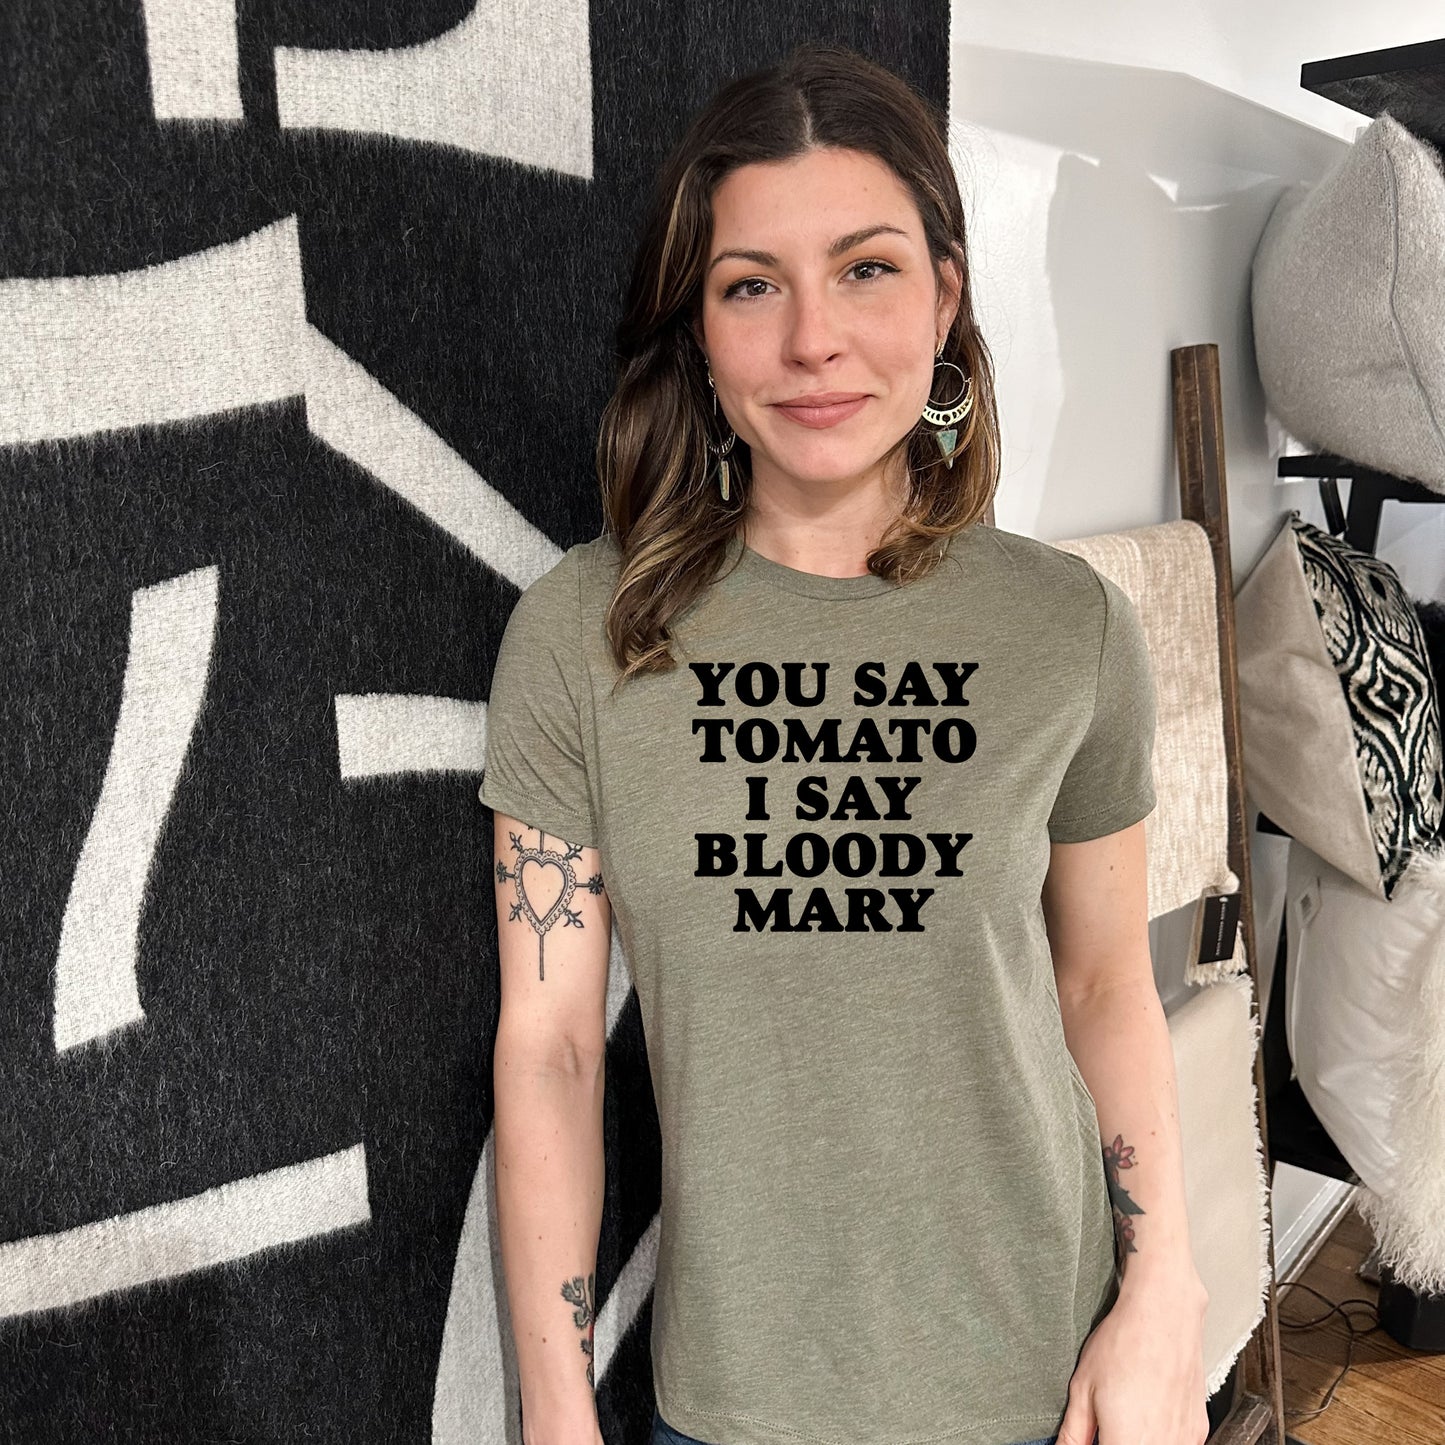 You Say Tomato I Say Bloody Mary - Women's Crew Tee - Olive or Dusty Blue